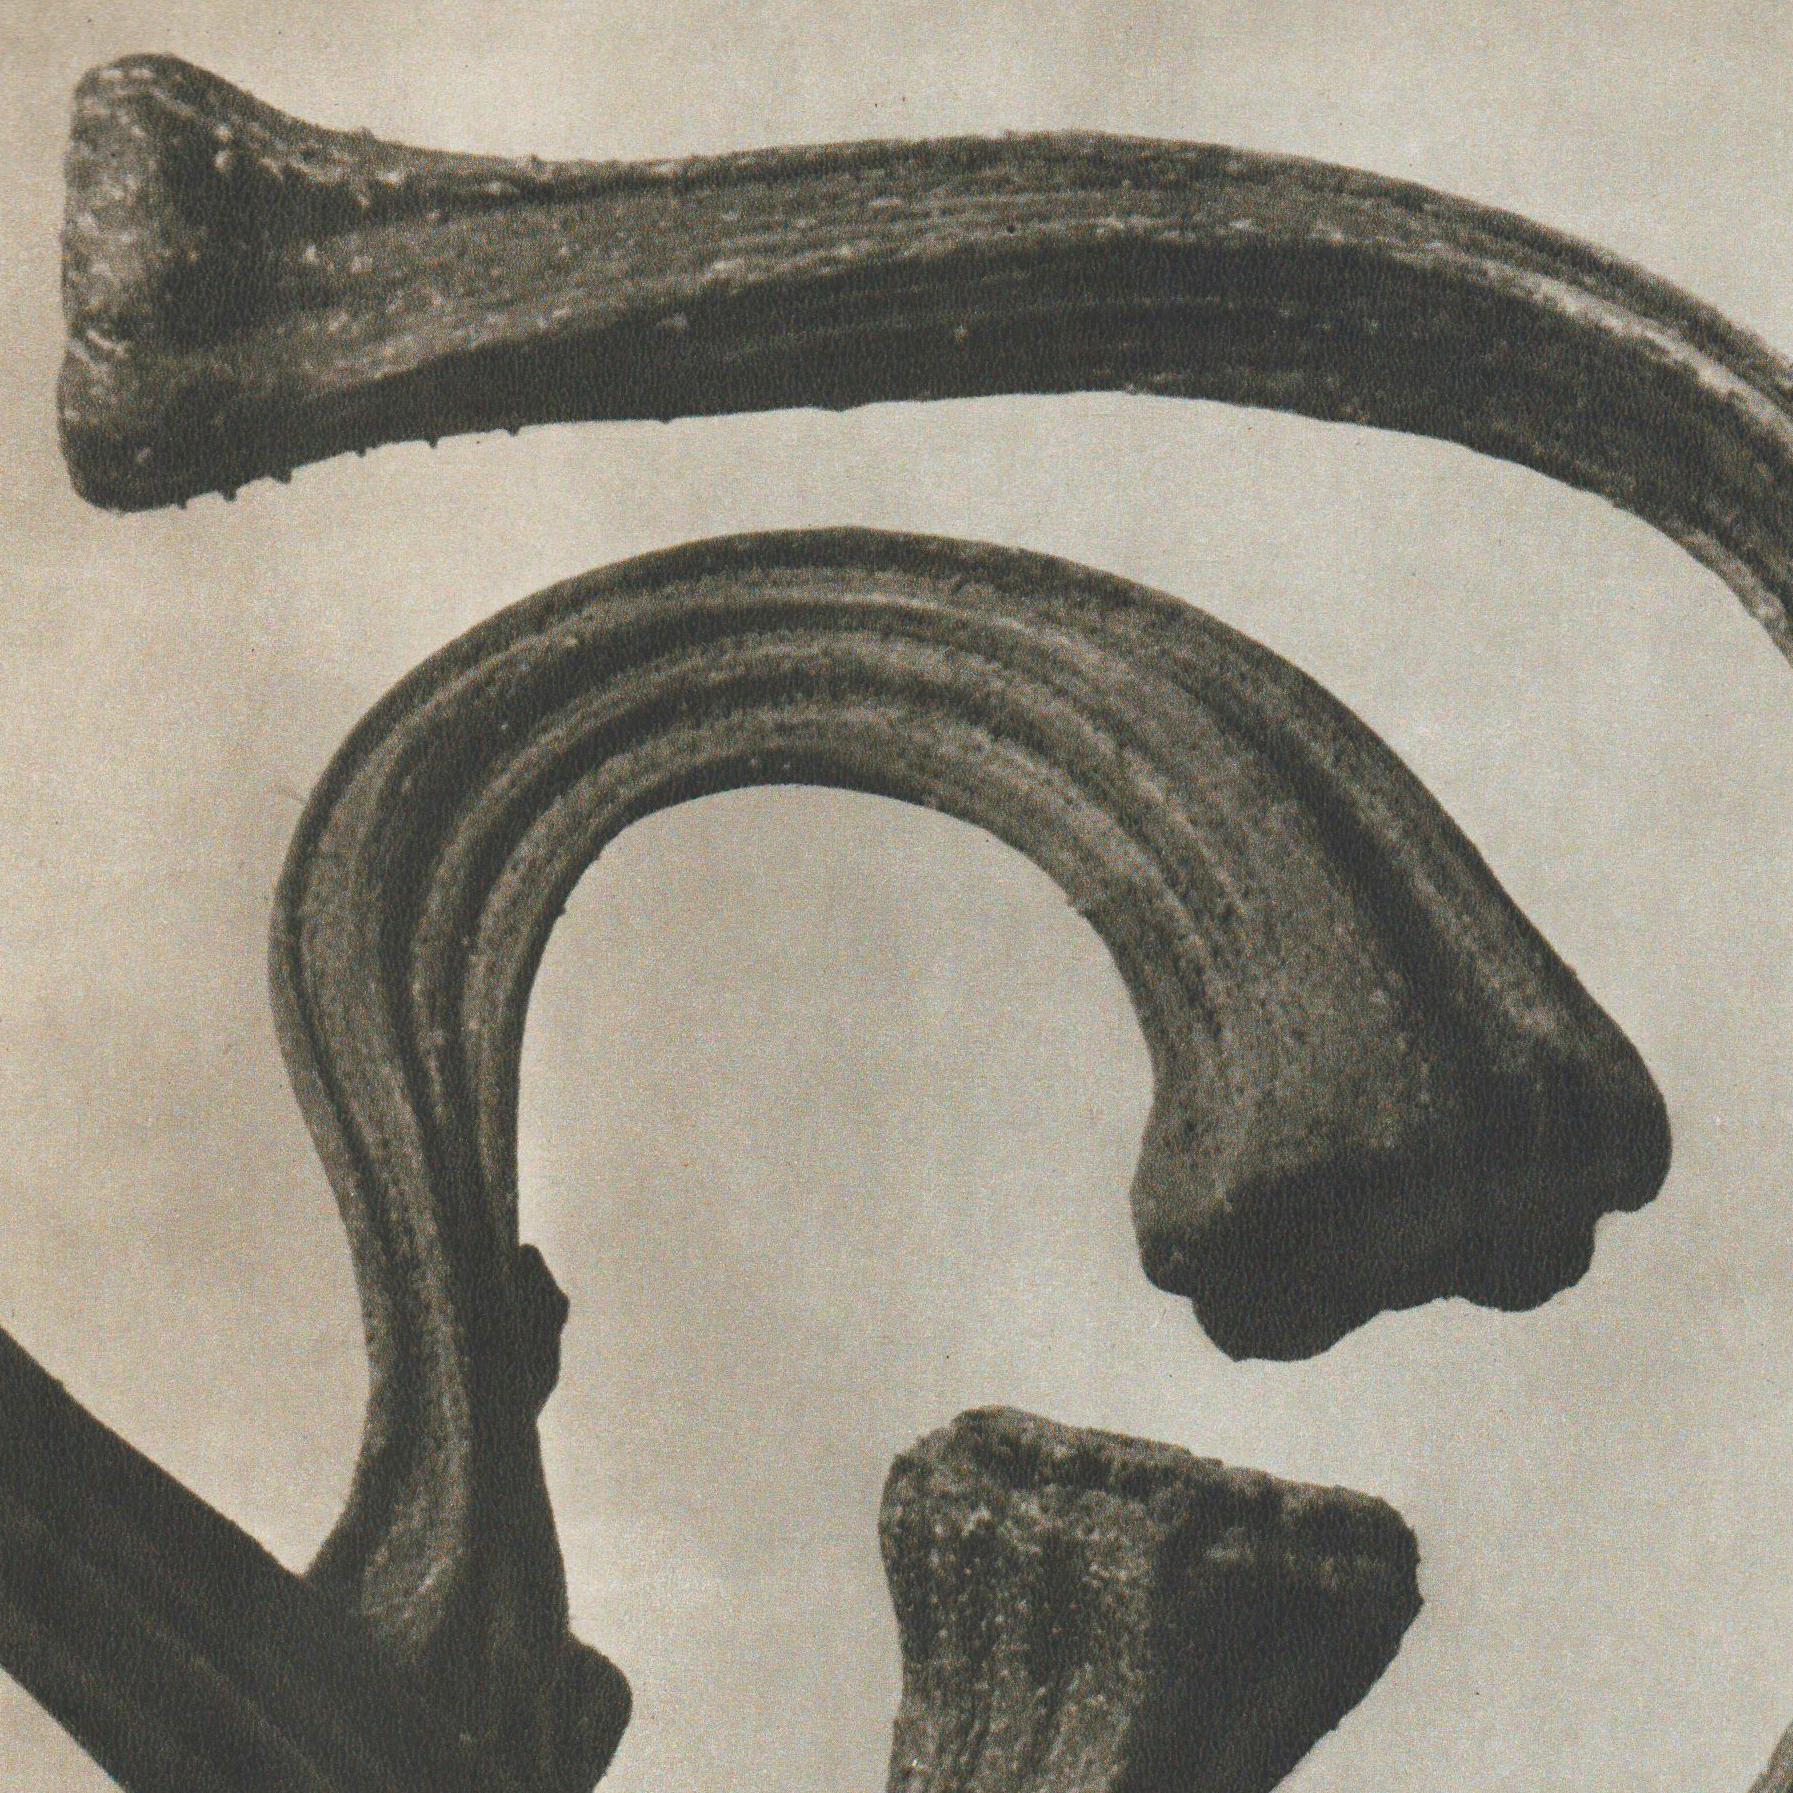 Karl Blossfeldt photogravure from the edition of the book 'Wunder in der Natur' in 1942.
Photography number 108. 'Cucurbita. Kürbisstengel in 3 facher. Vergrößerung.'

In original condition, with minor wear consistent with age and use, preserving